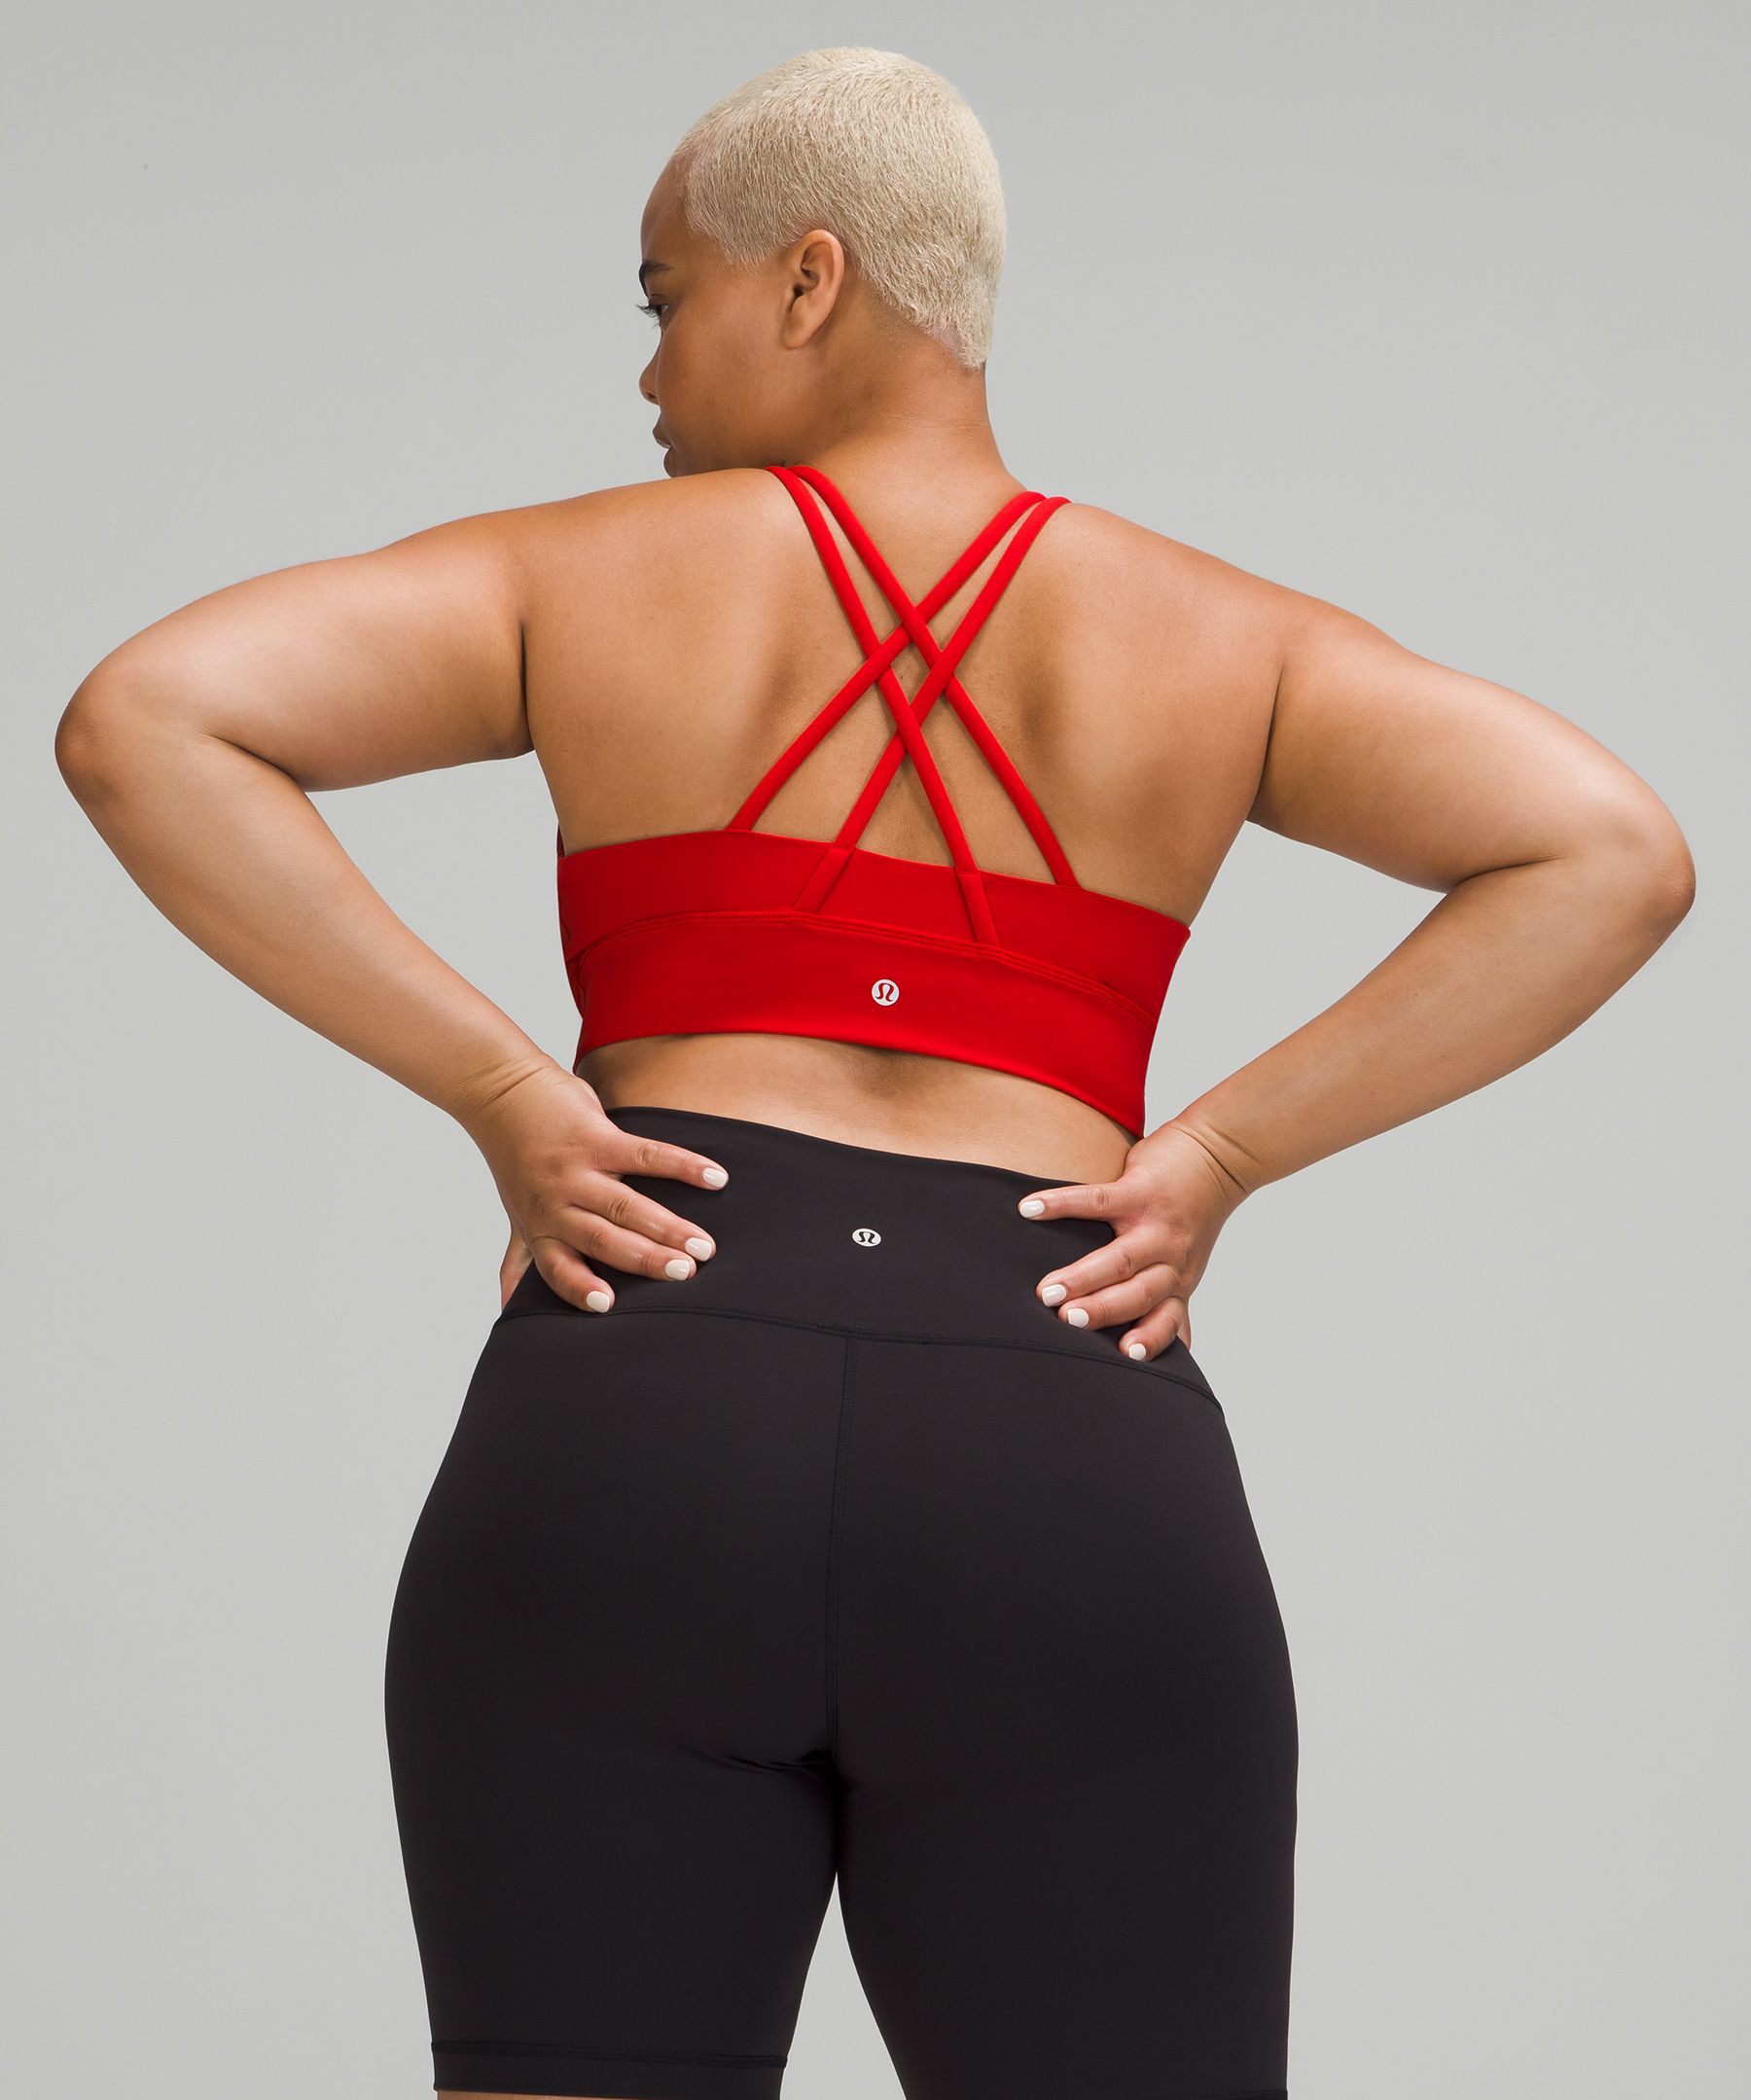 Staying neutral in athleisure: Dynamic Days Pant in Saddle Brown (4) and  Energy Bra Longline (6) : r/lululemon